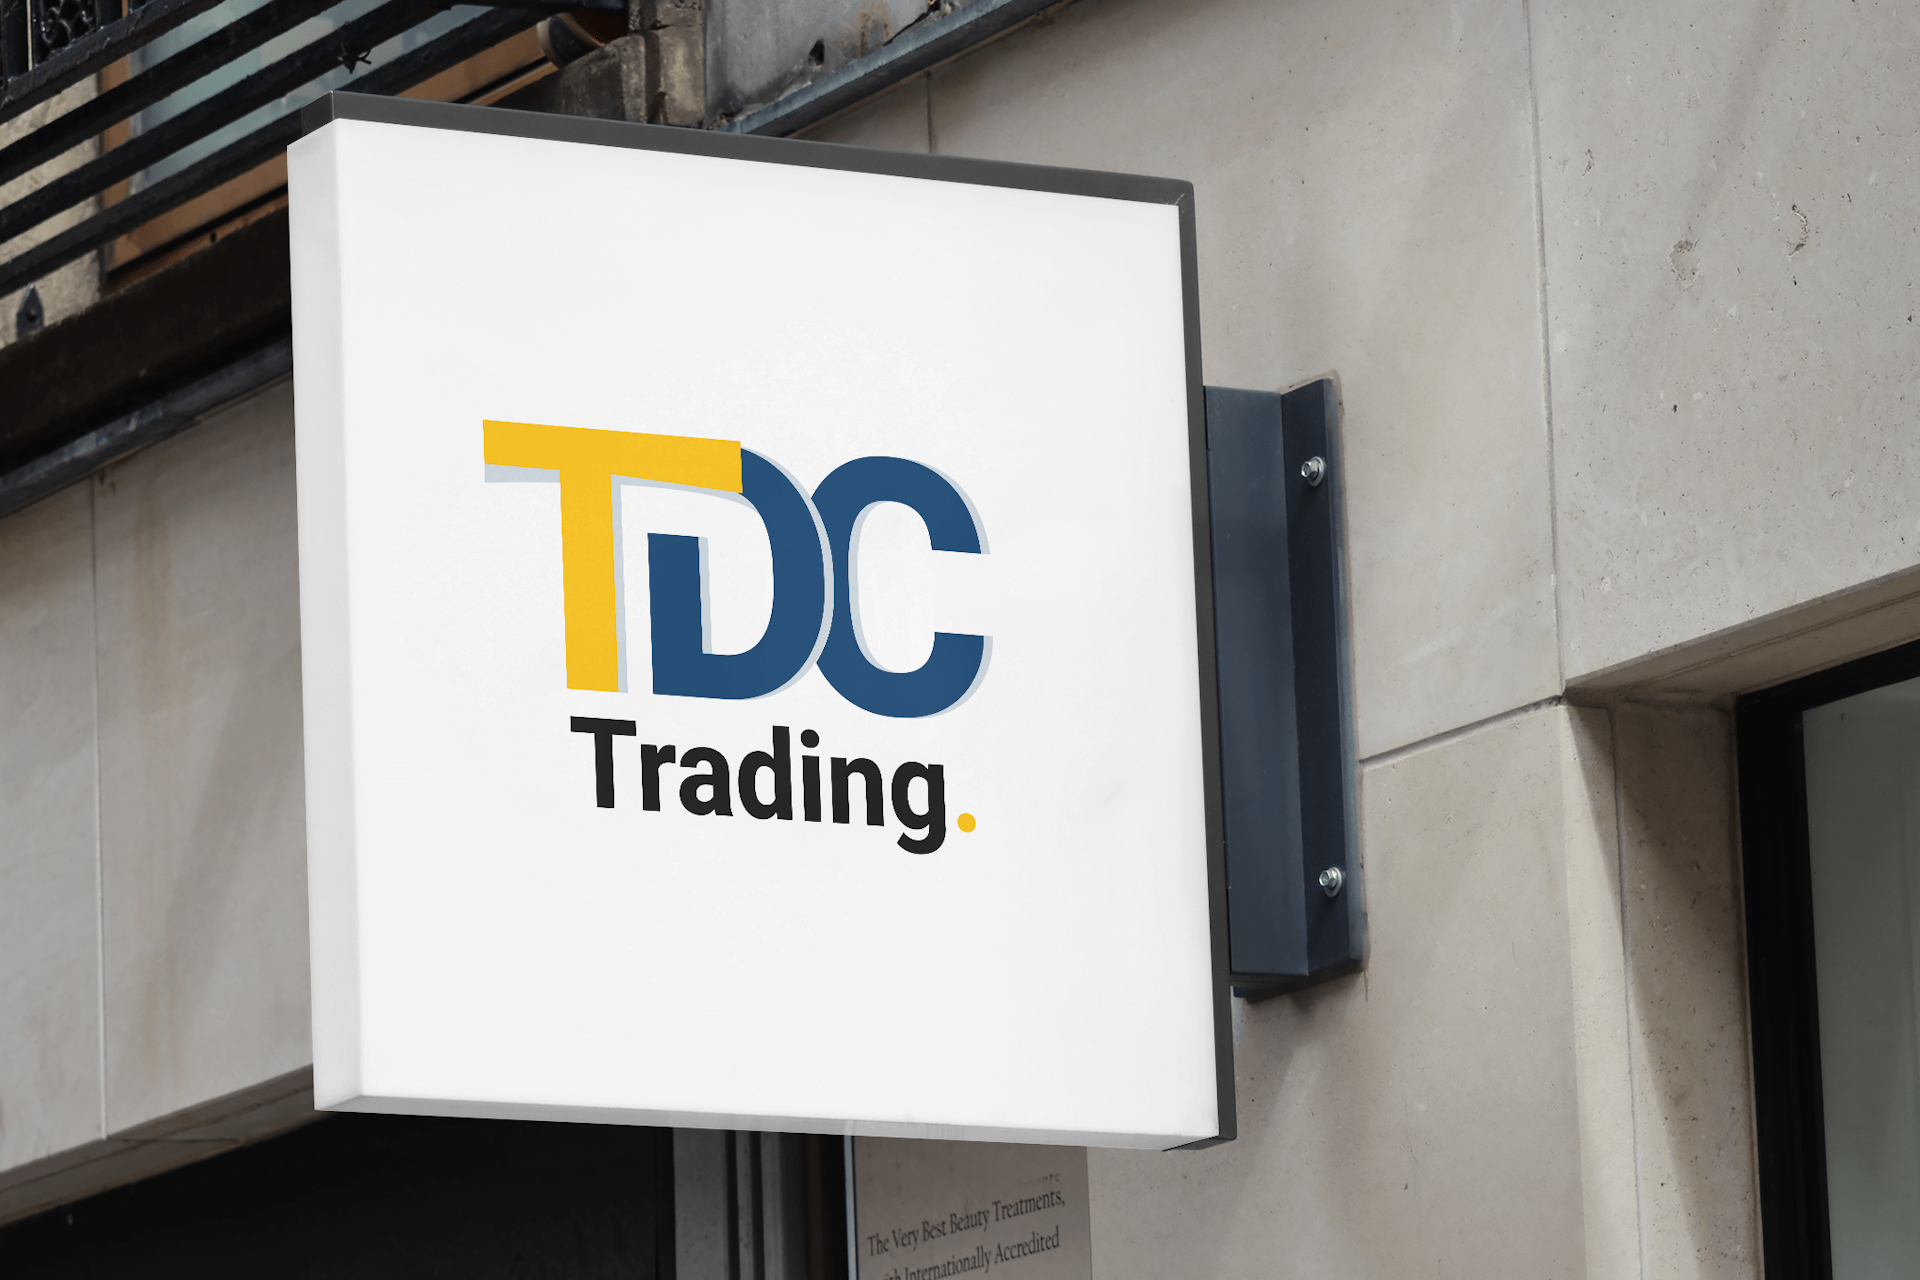 Welcome to TDC Trading